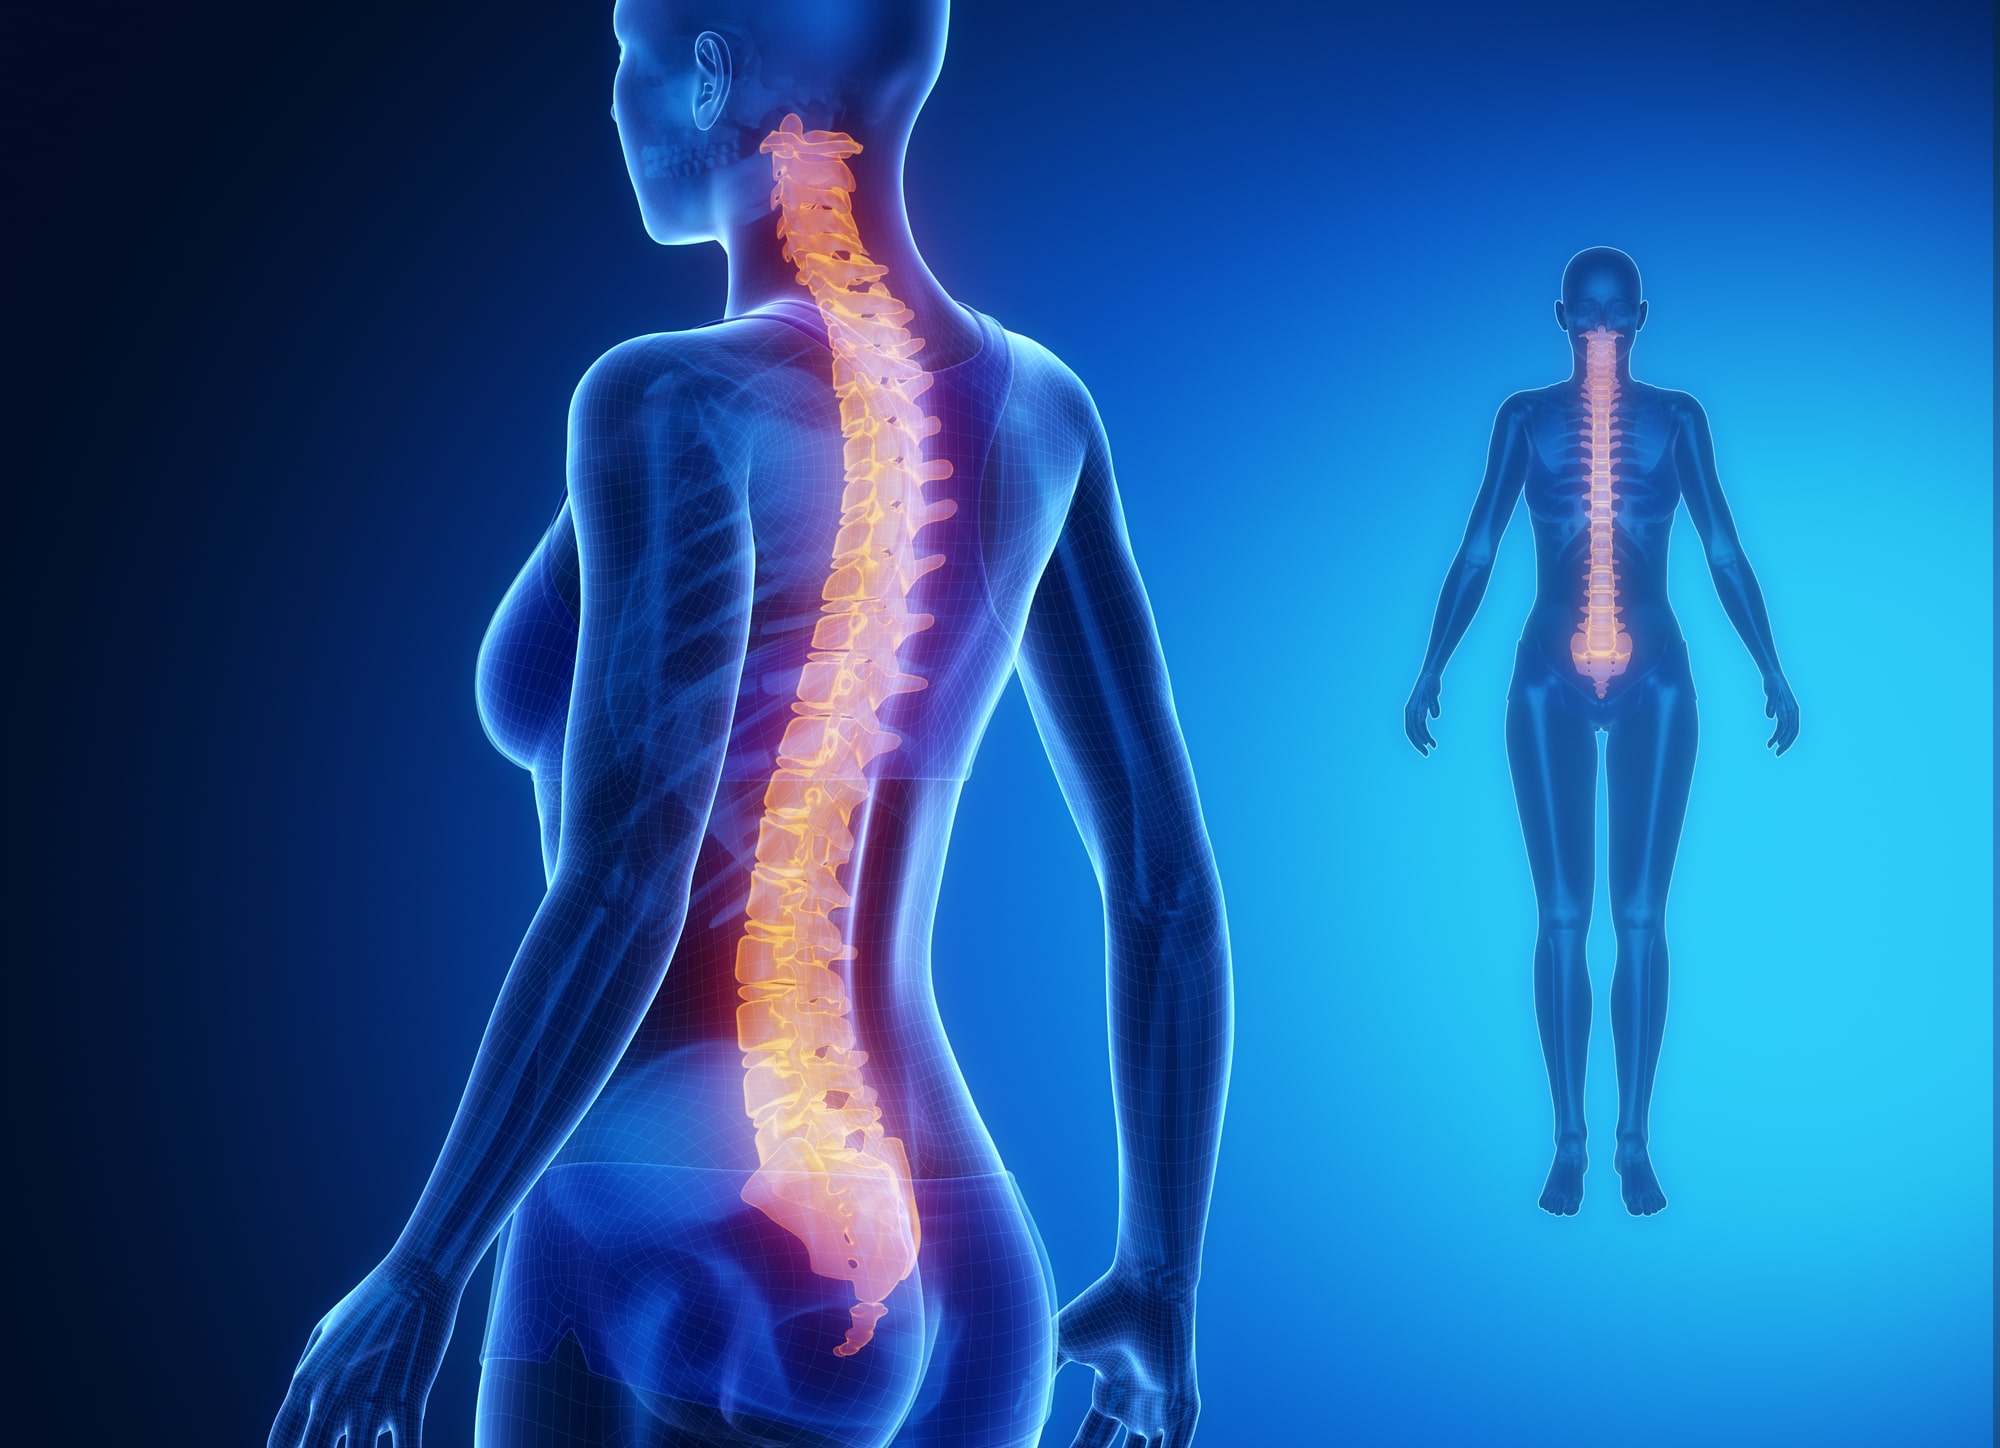 What are Spinal Cord Injury Symptoms?